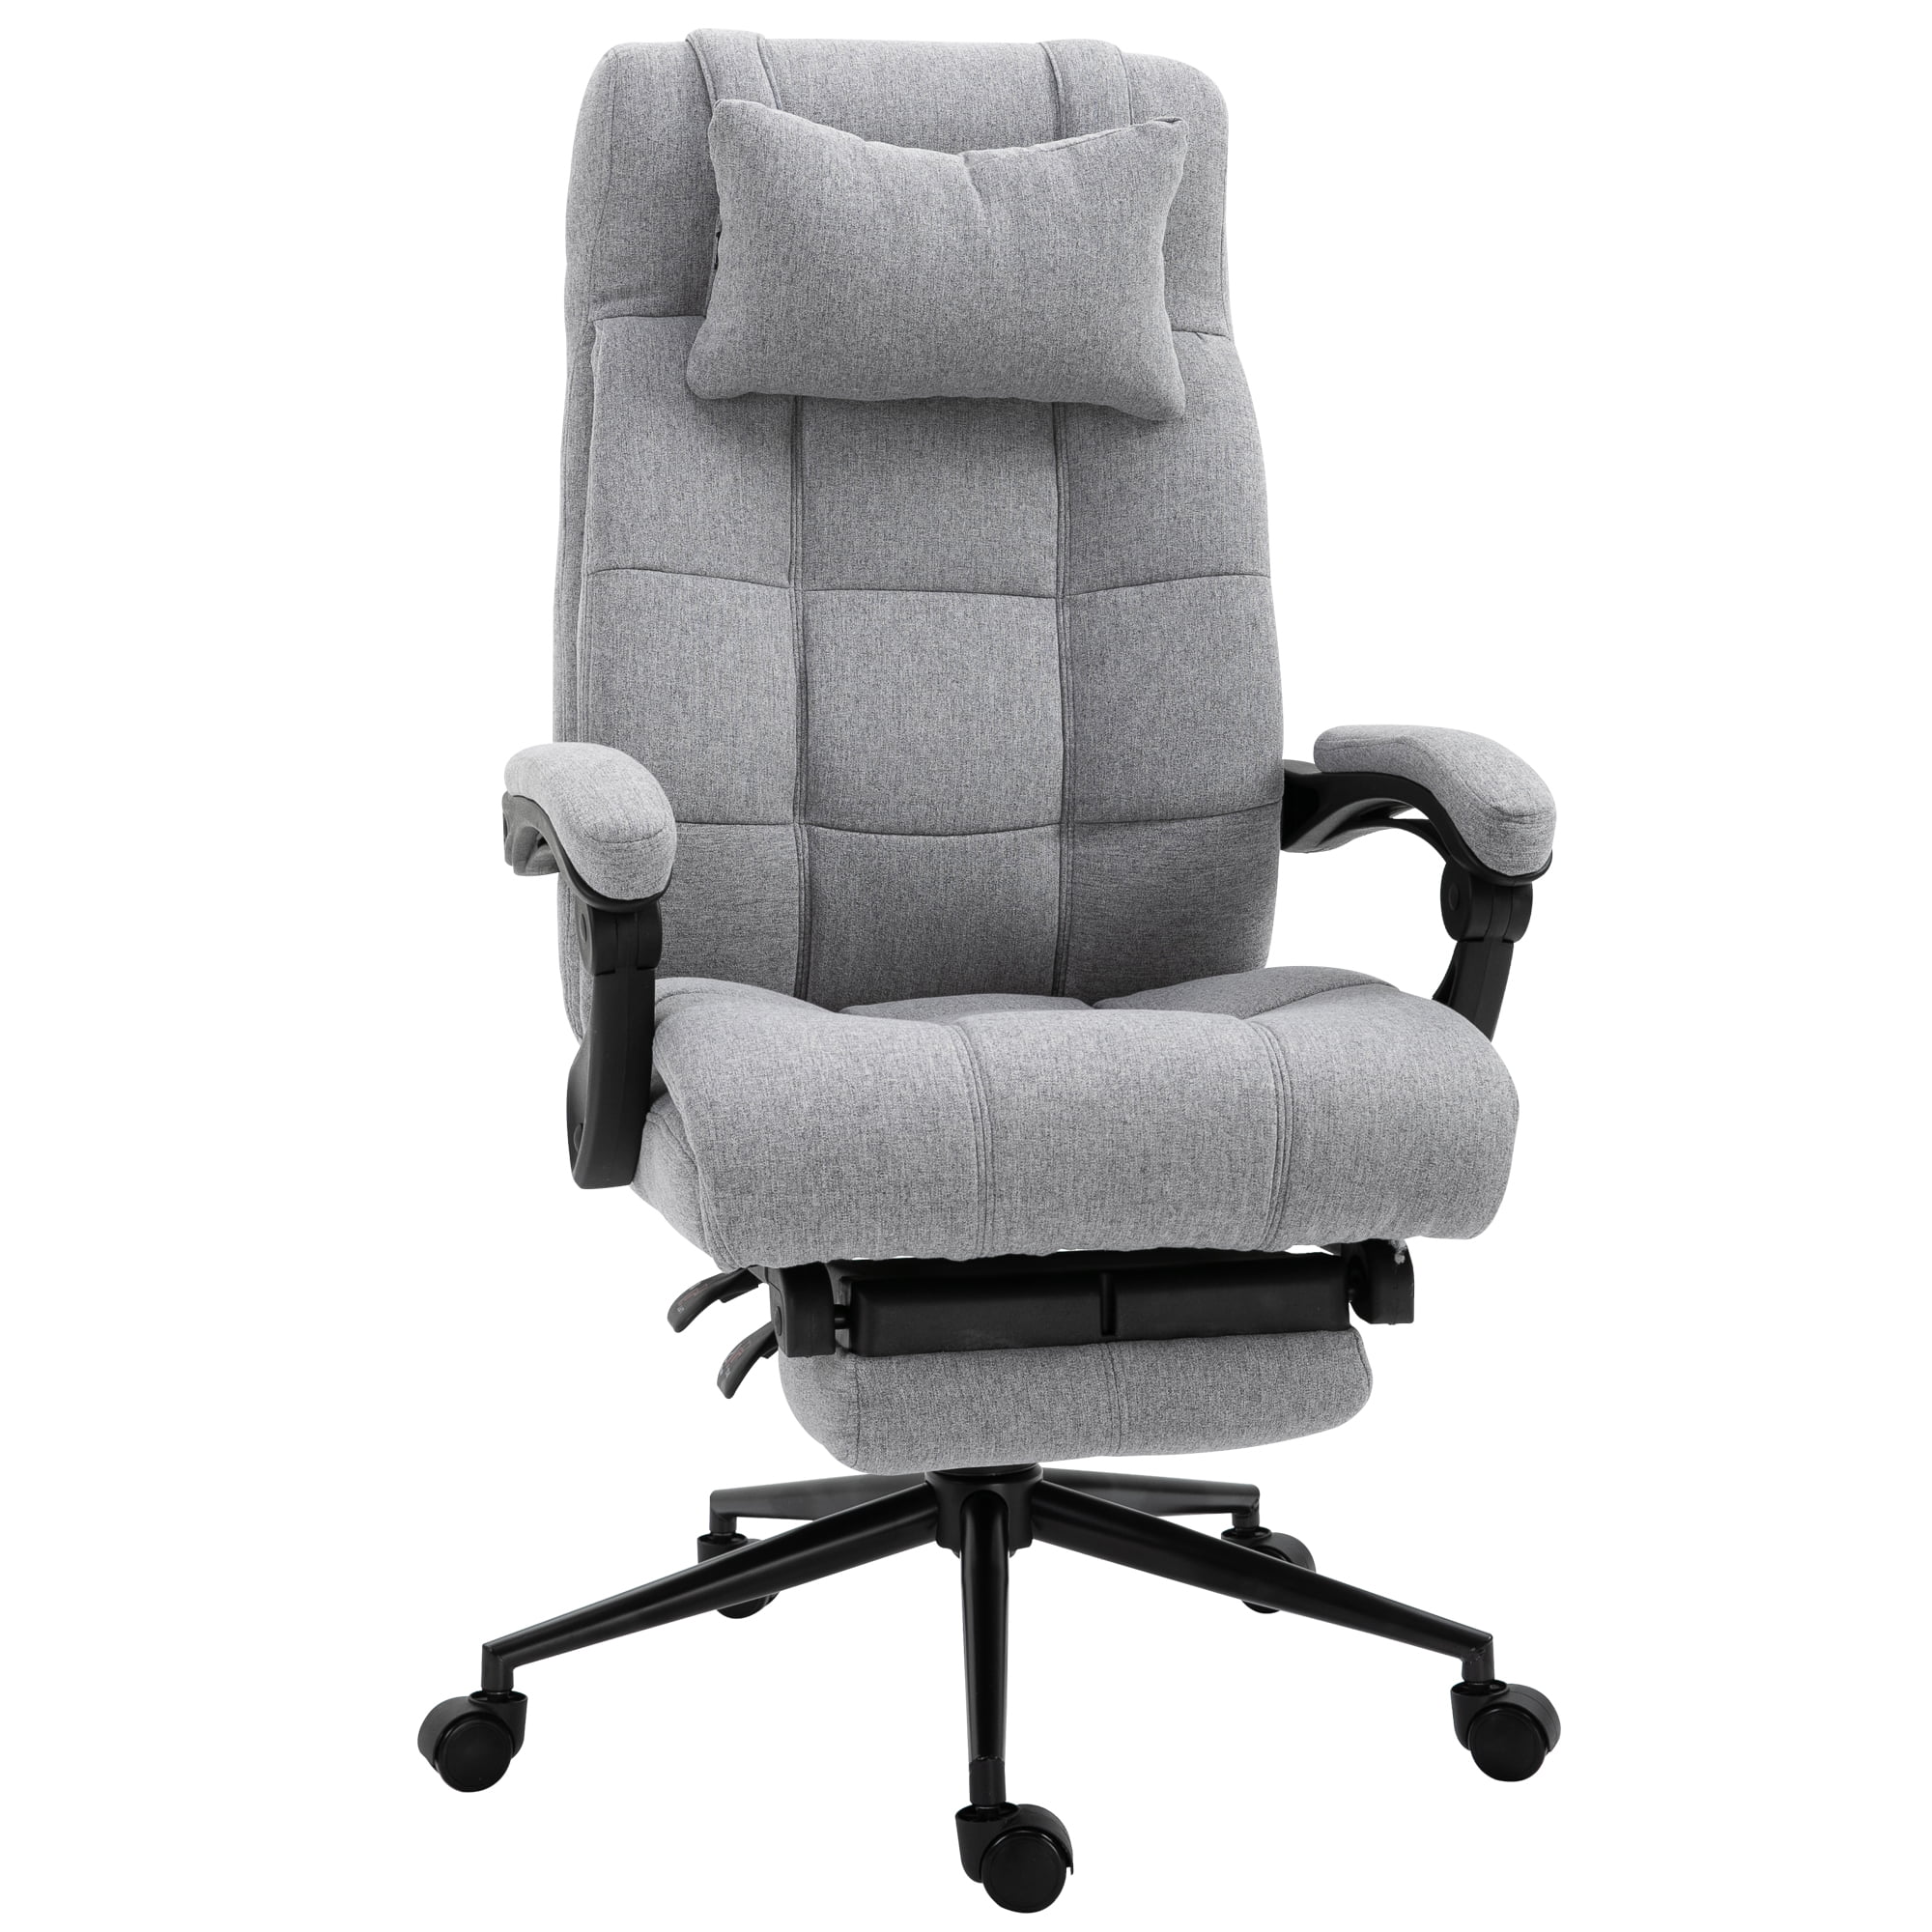 Vinsetto Executive Linen Fabric Home Office Chair with Retractable